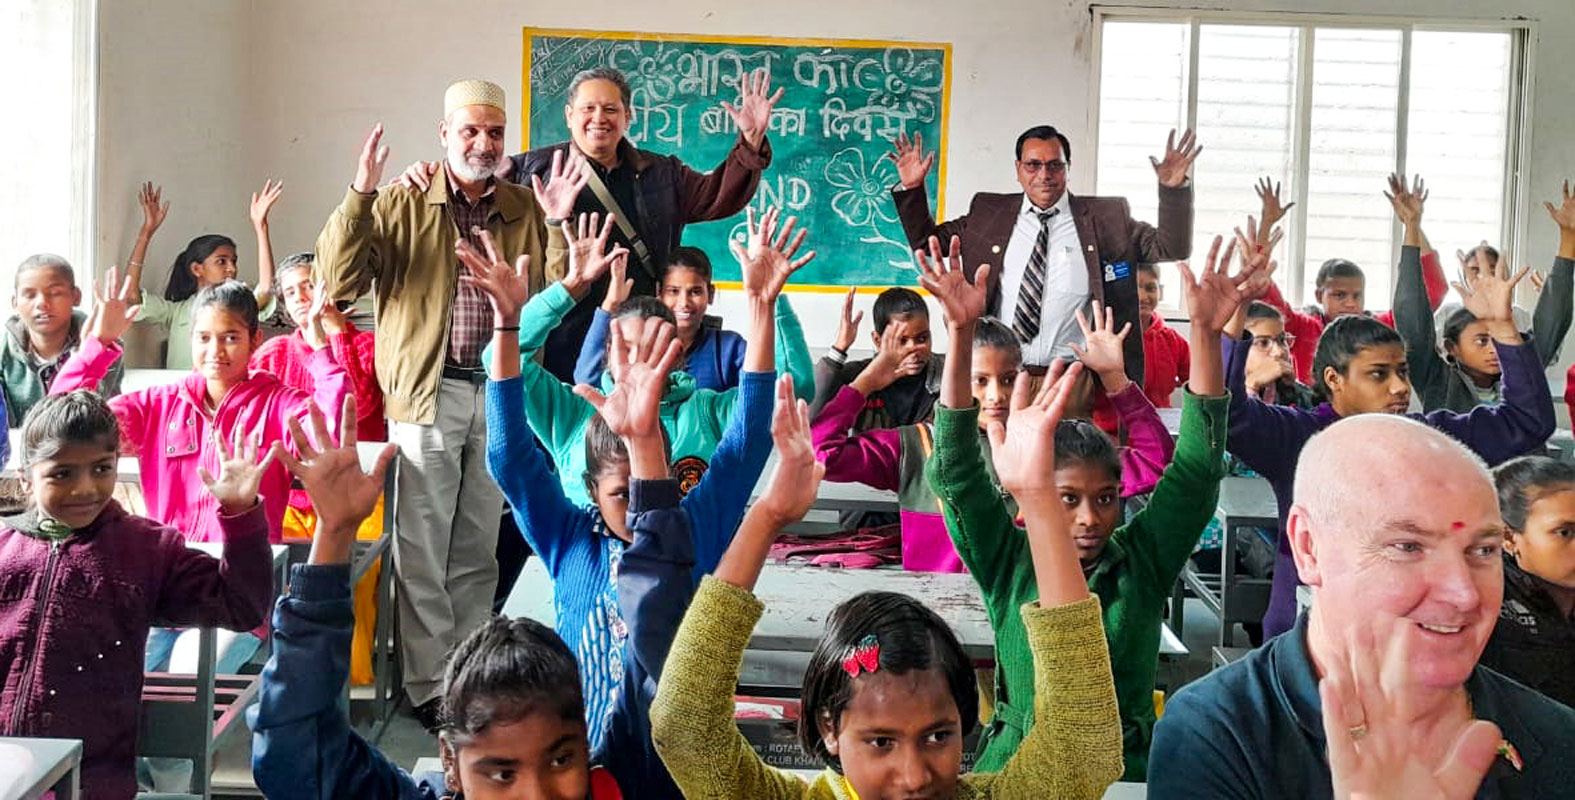 PDG Zamin Hussain, DGND Shahul Hameed from Singapore and RC Sonkutch president Dinesh Carpenter at the Anand Society School for Special Children where furniture were gifted. Rtn Brock is seen on the foreground.